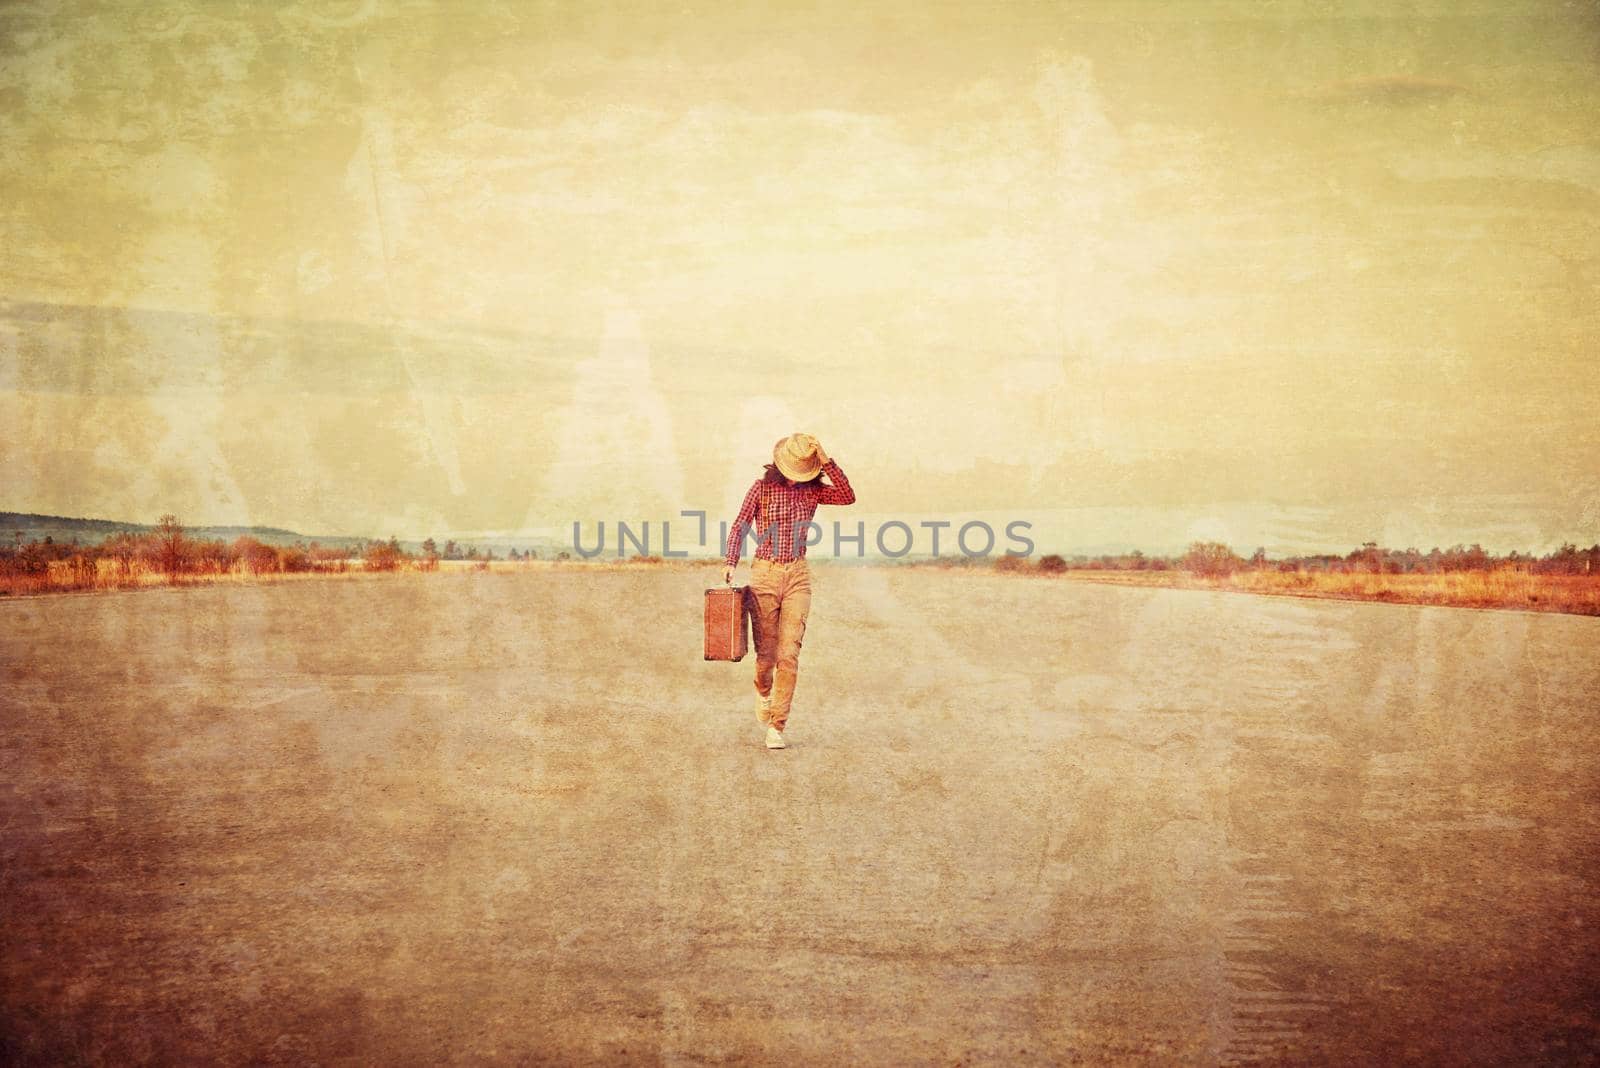 Traveler woman is running with suitcase on road. Vintage image